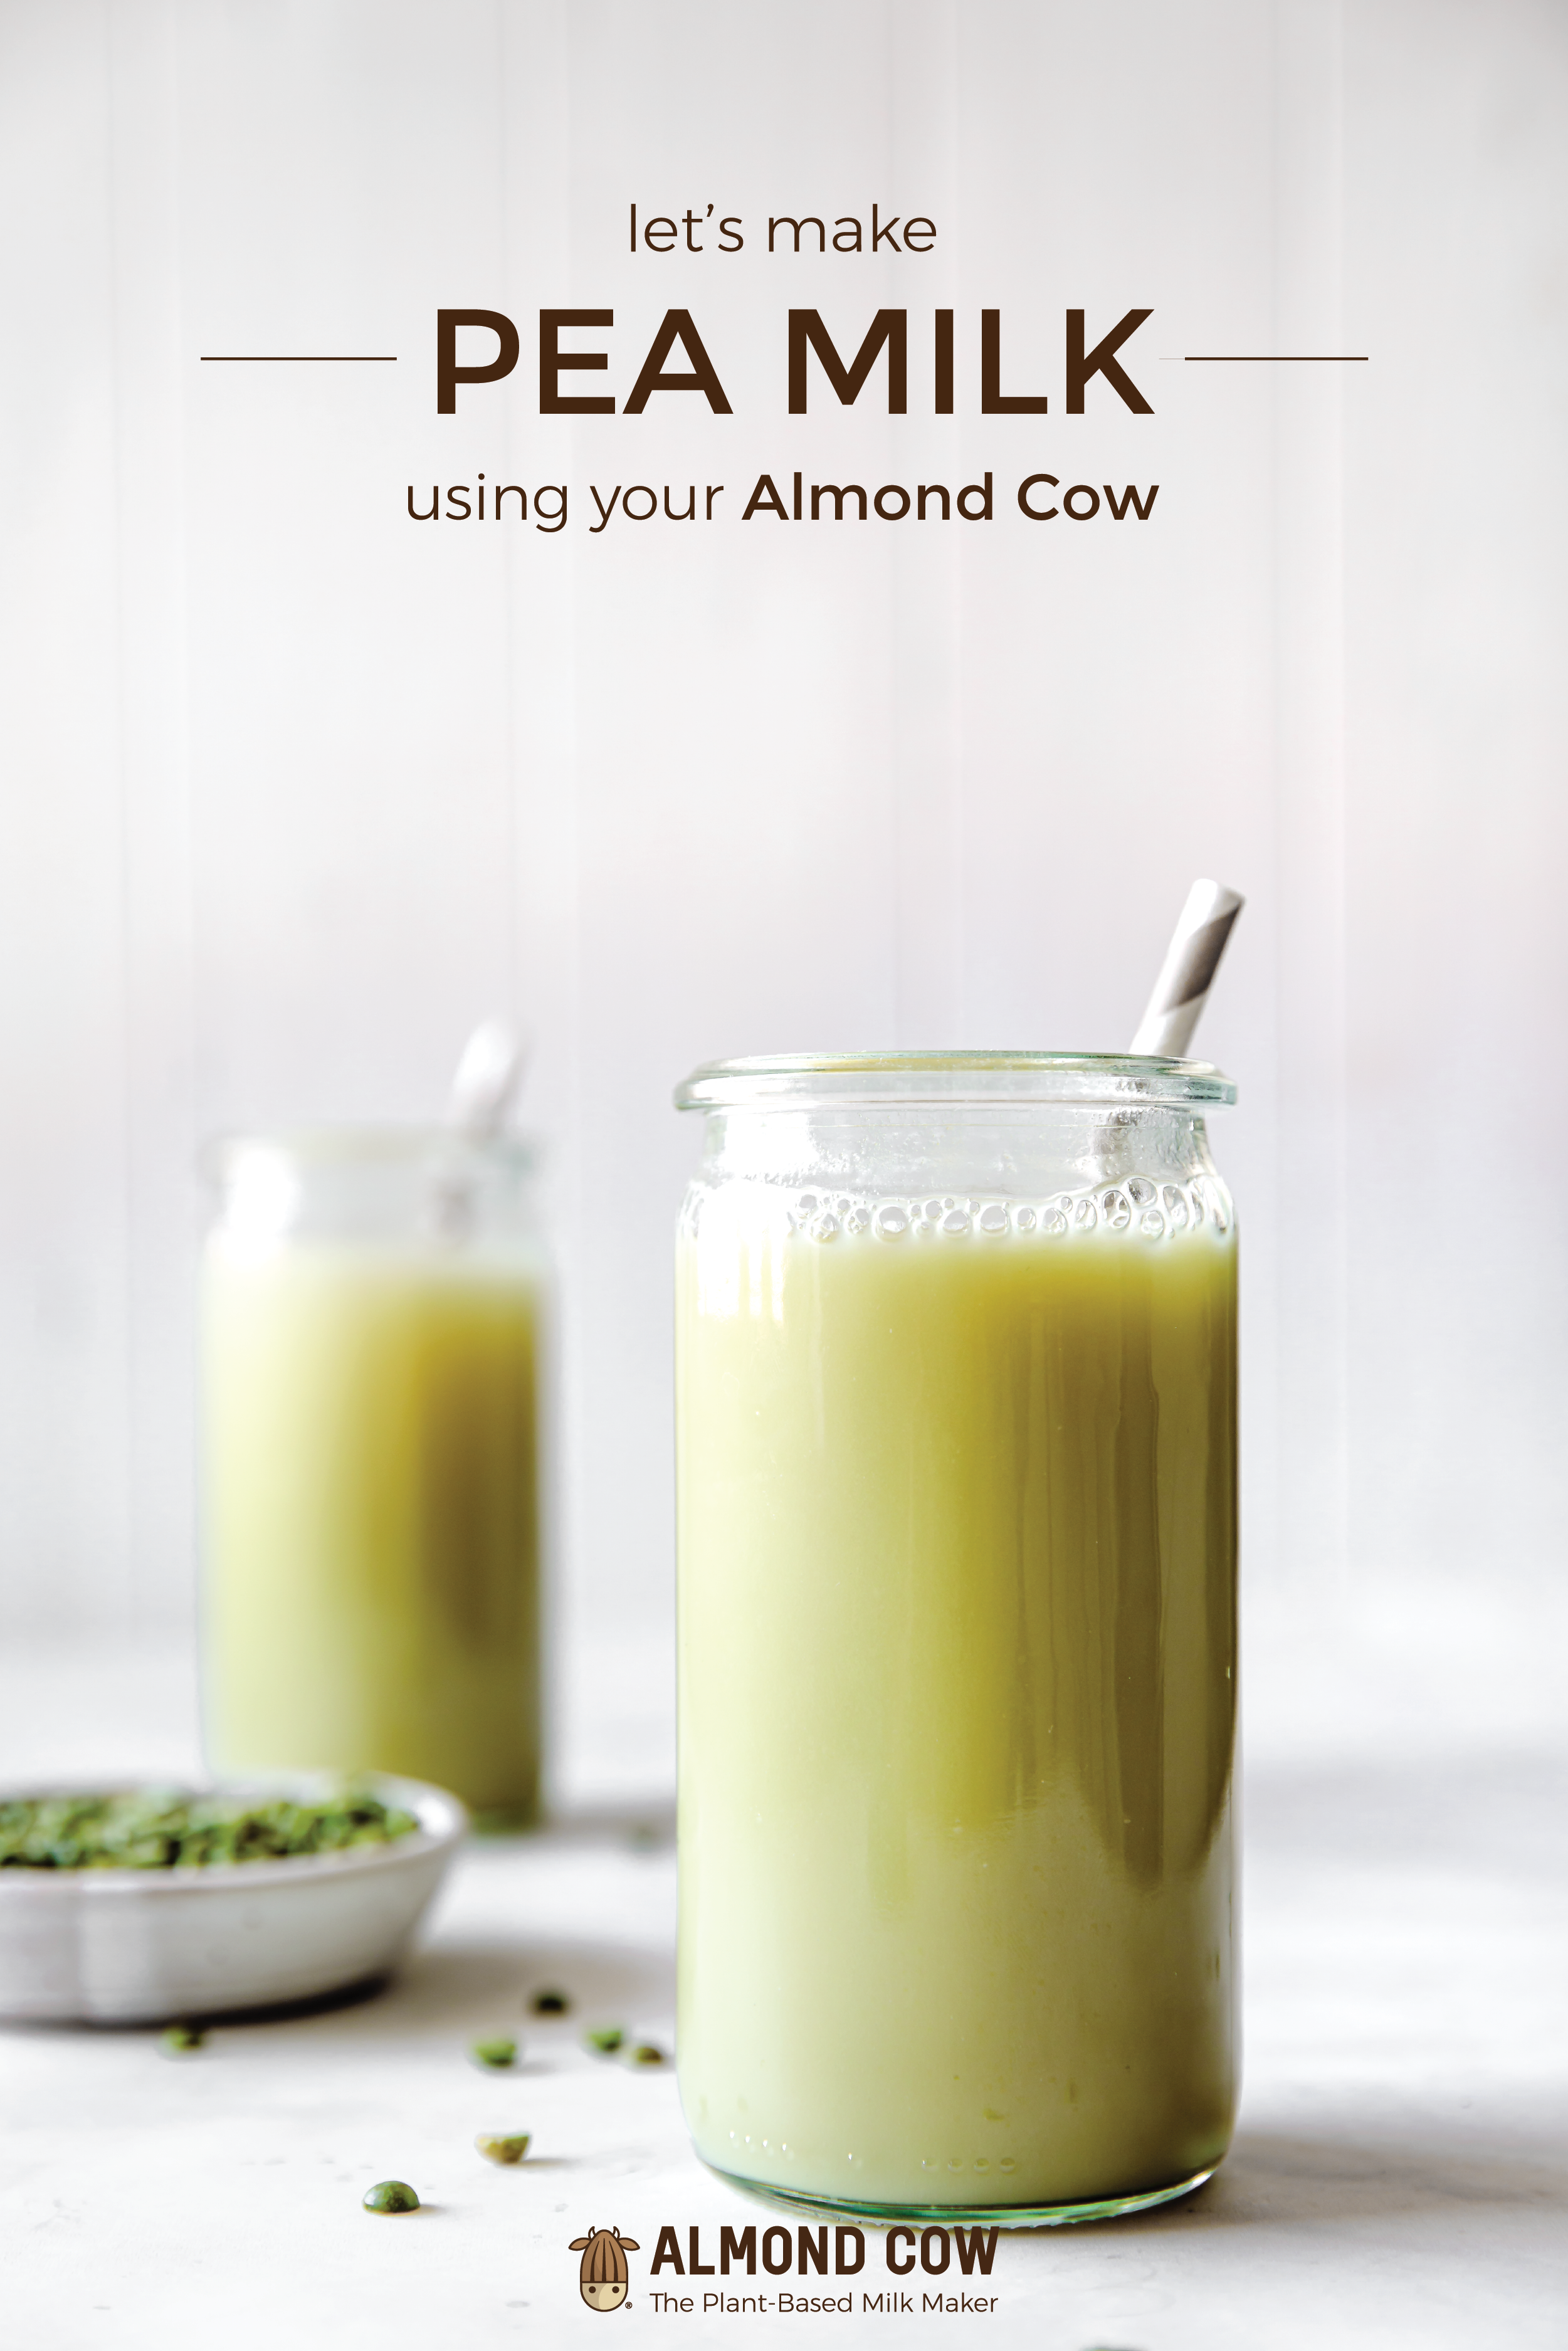 Almond Cow - The Plant-Based Milk Maker -   17 diet Clean Eating almond milk ideas